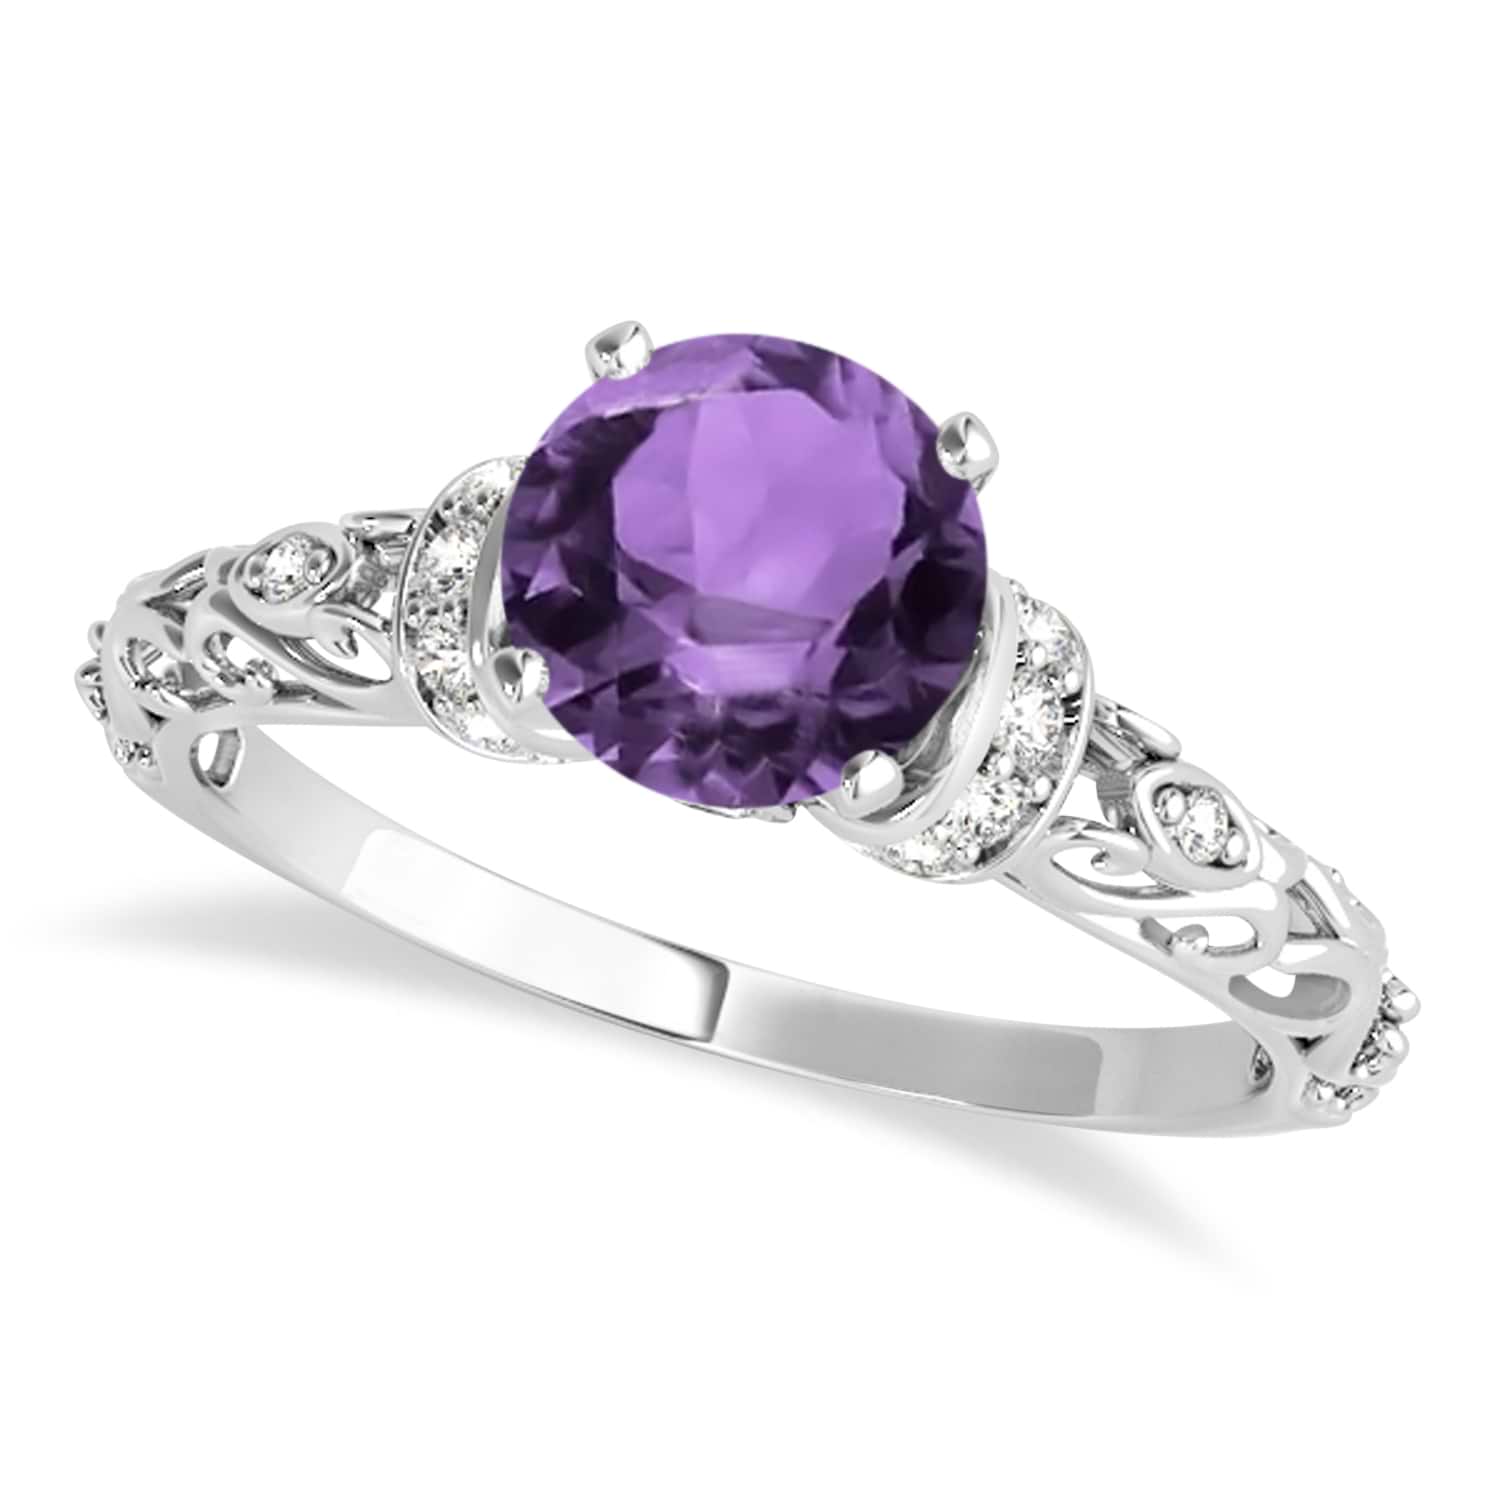 Amethyst & Diamond Antique Style Engagement Ring 18k White Gold (0.87ct)